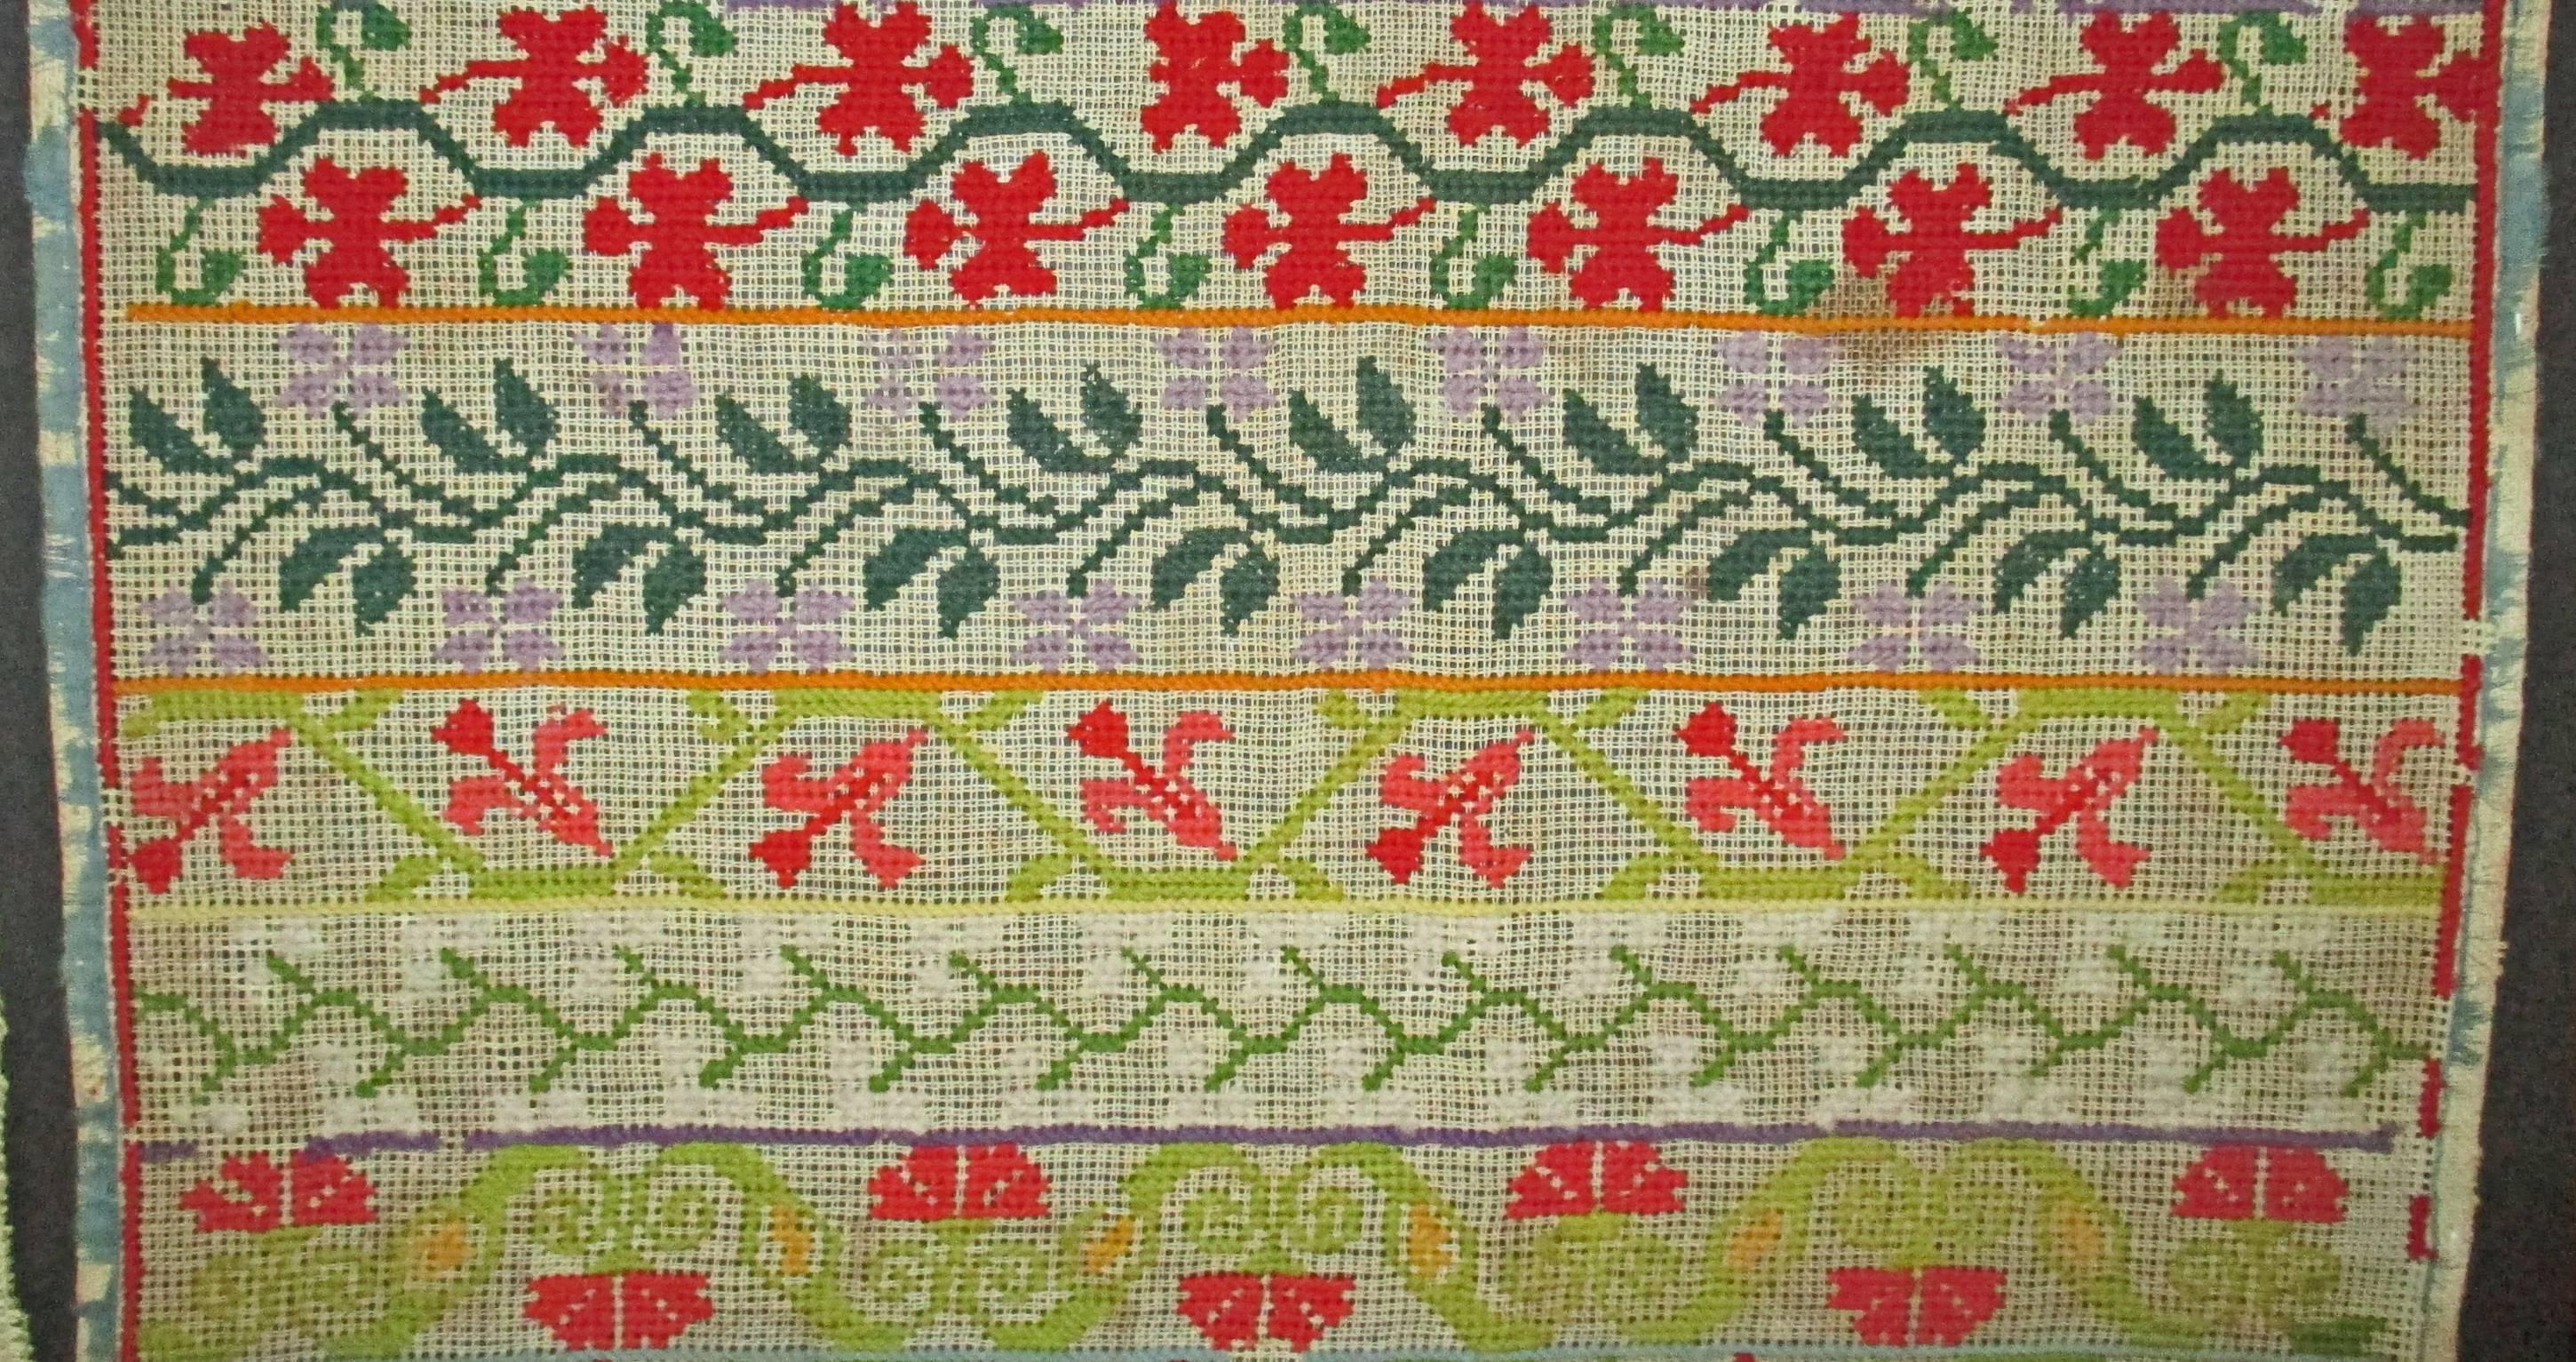 Folk Art 19th Century Mexican Needlepoint Sampler, Dated 1880, Colorful and Elaborate For Sale